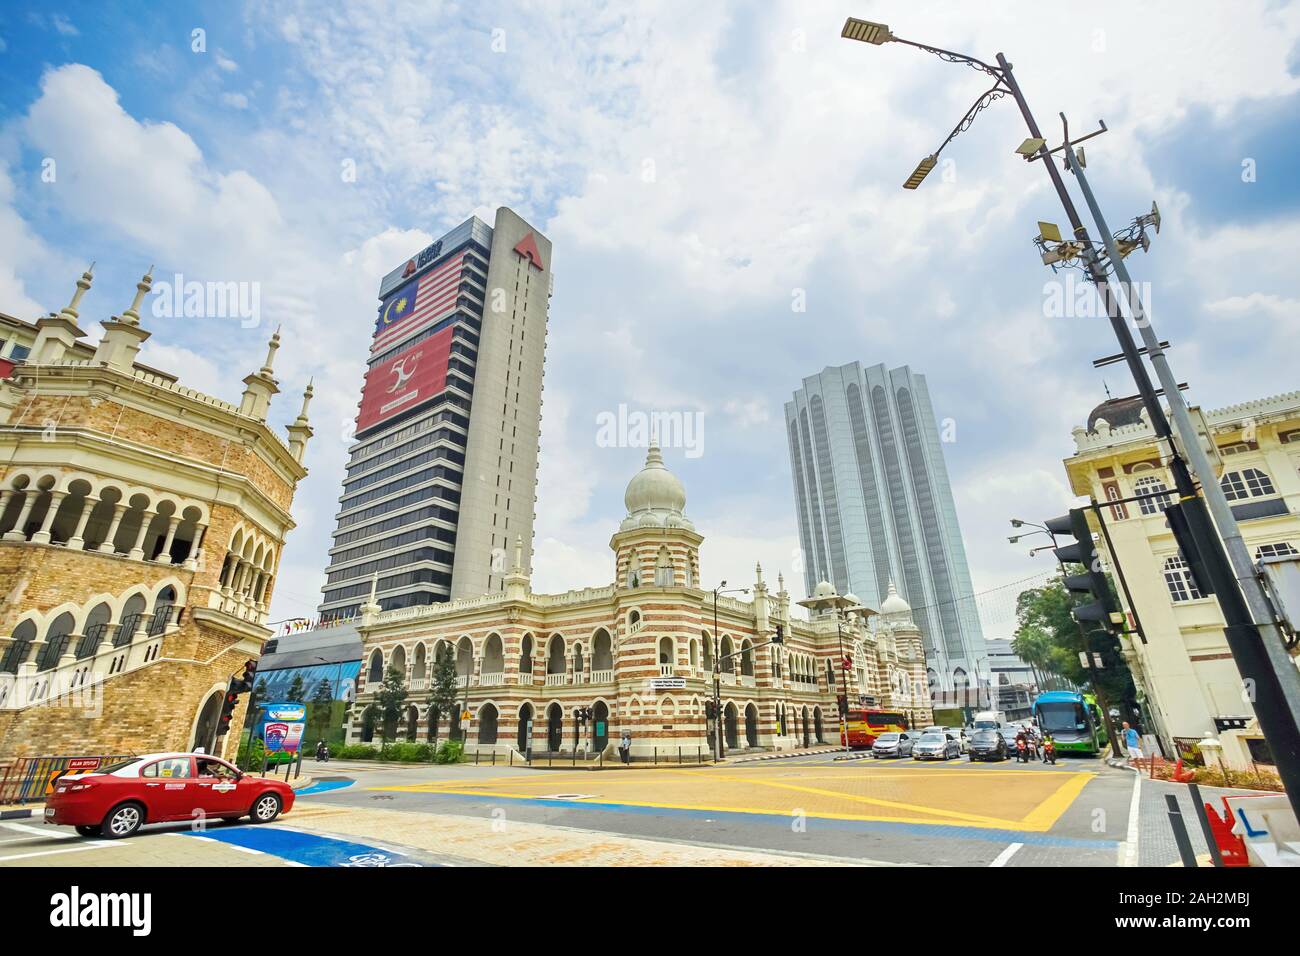 Kuala Lumpur, Malaysia - November 7, 2019: In front of the National Textile Museum, Kuala Lumpur City, Malaysia. The Beautiful building is close to th Stock Photo